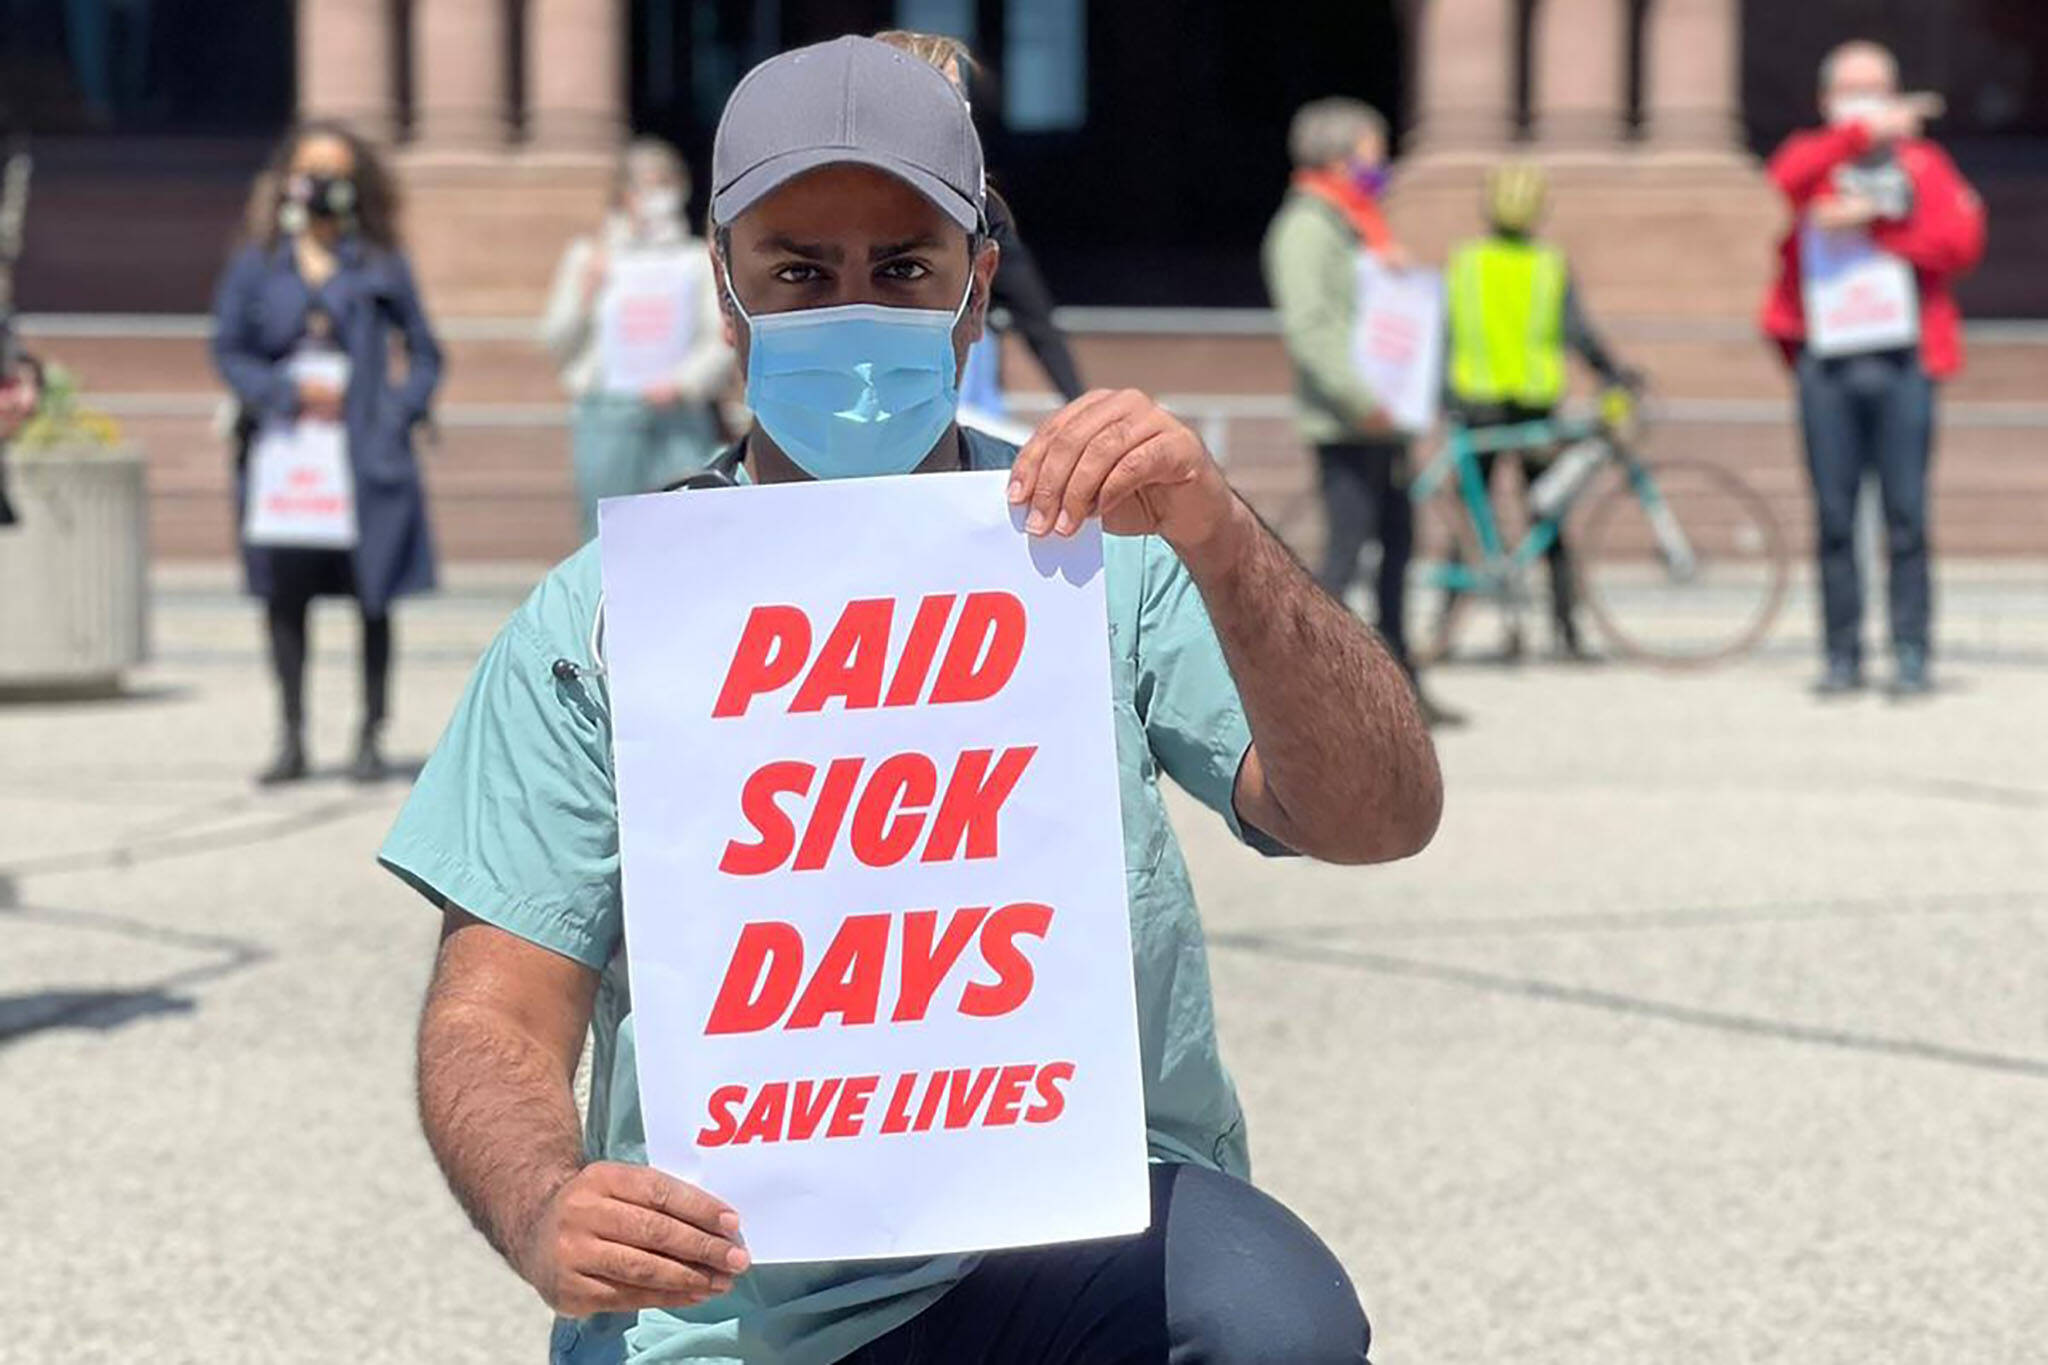 A change is coming to paid sick days for some workers in Ontario